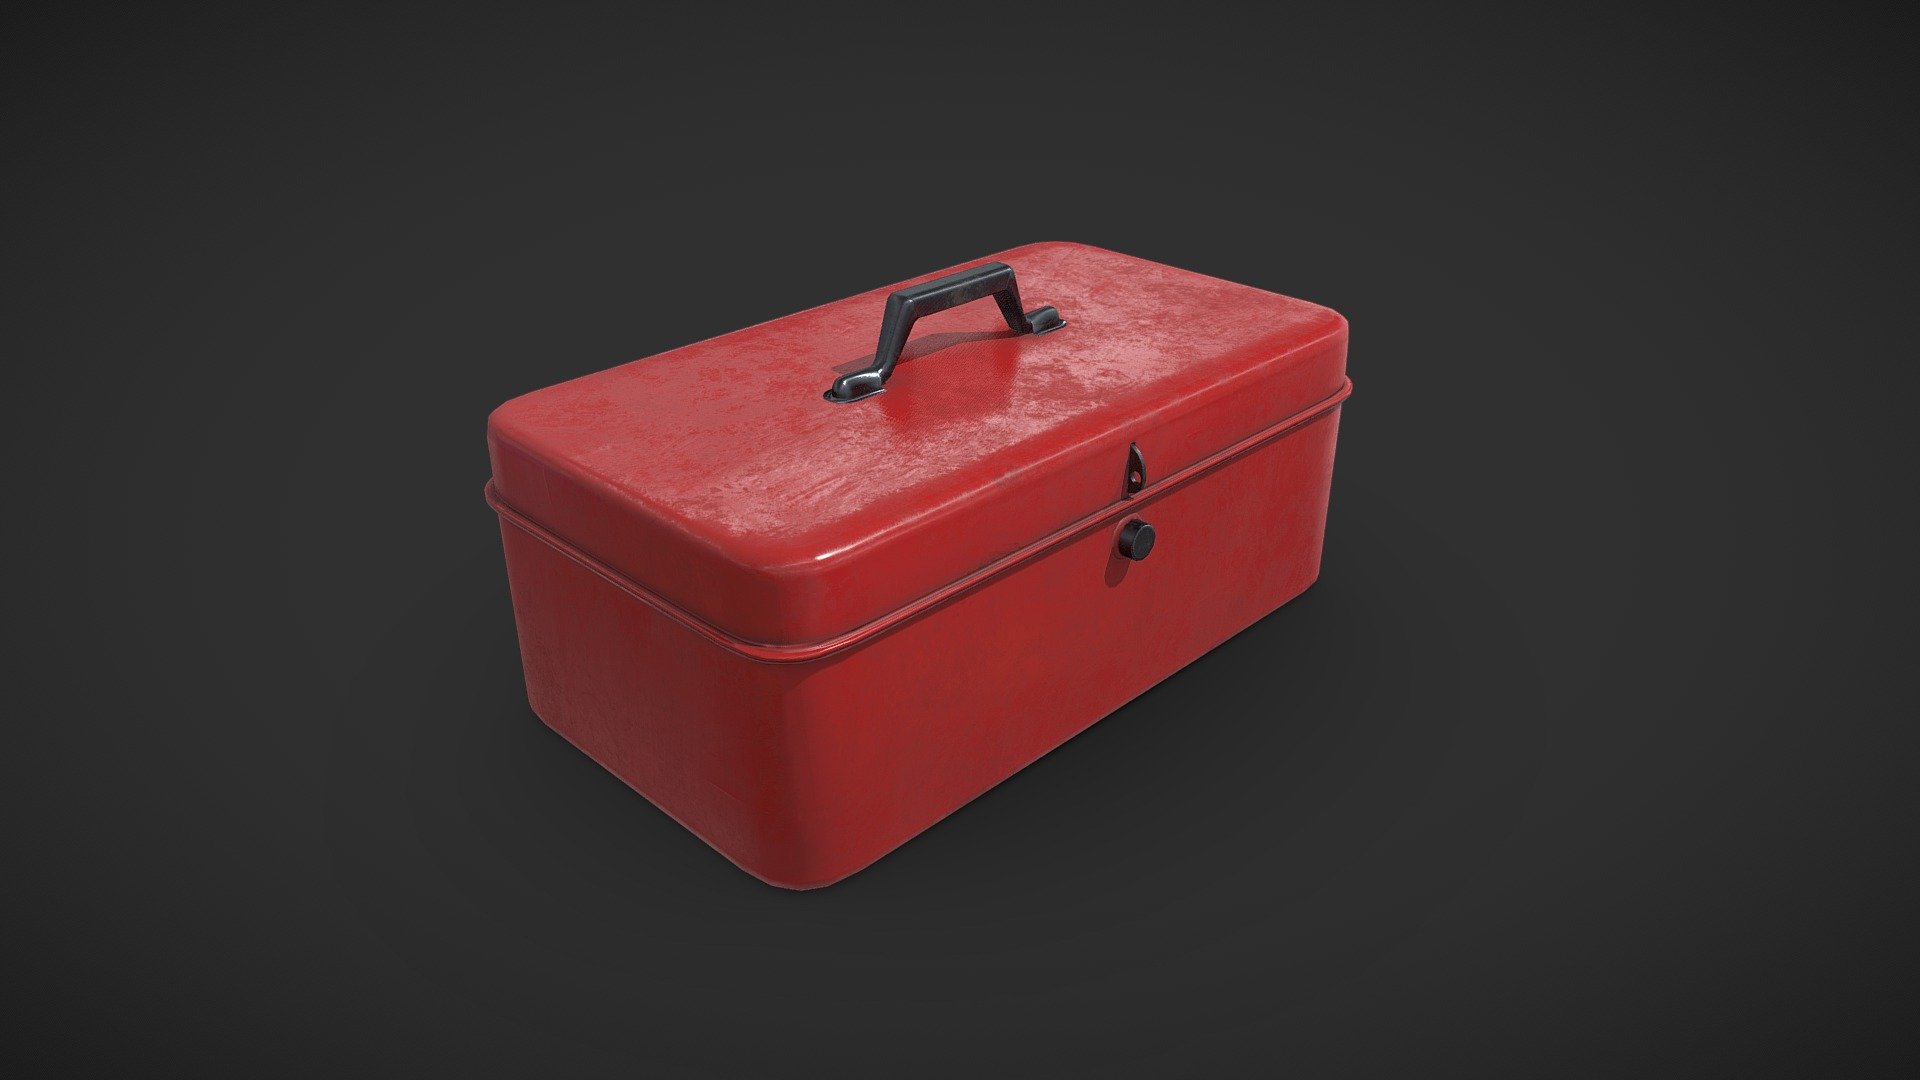 Toolbox Lowpoly PBR model - ready for use in AR, VR, Realtime Visualizations &amp; Games with 4K Textures 3d model